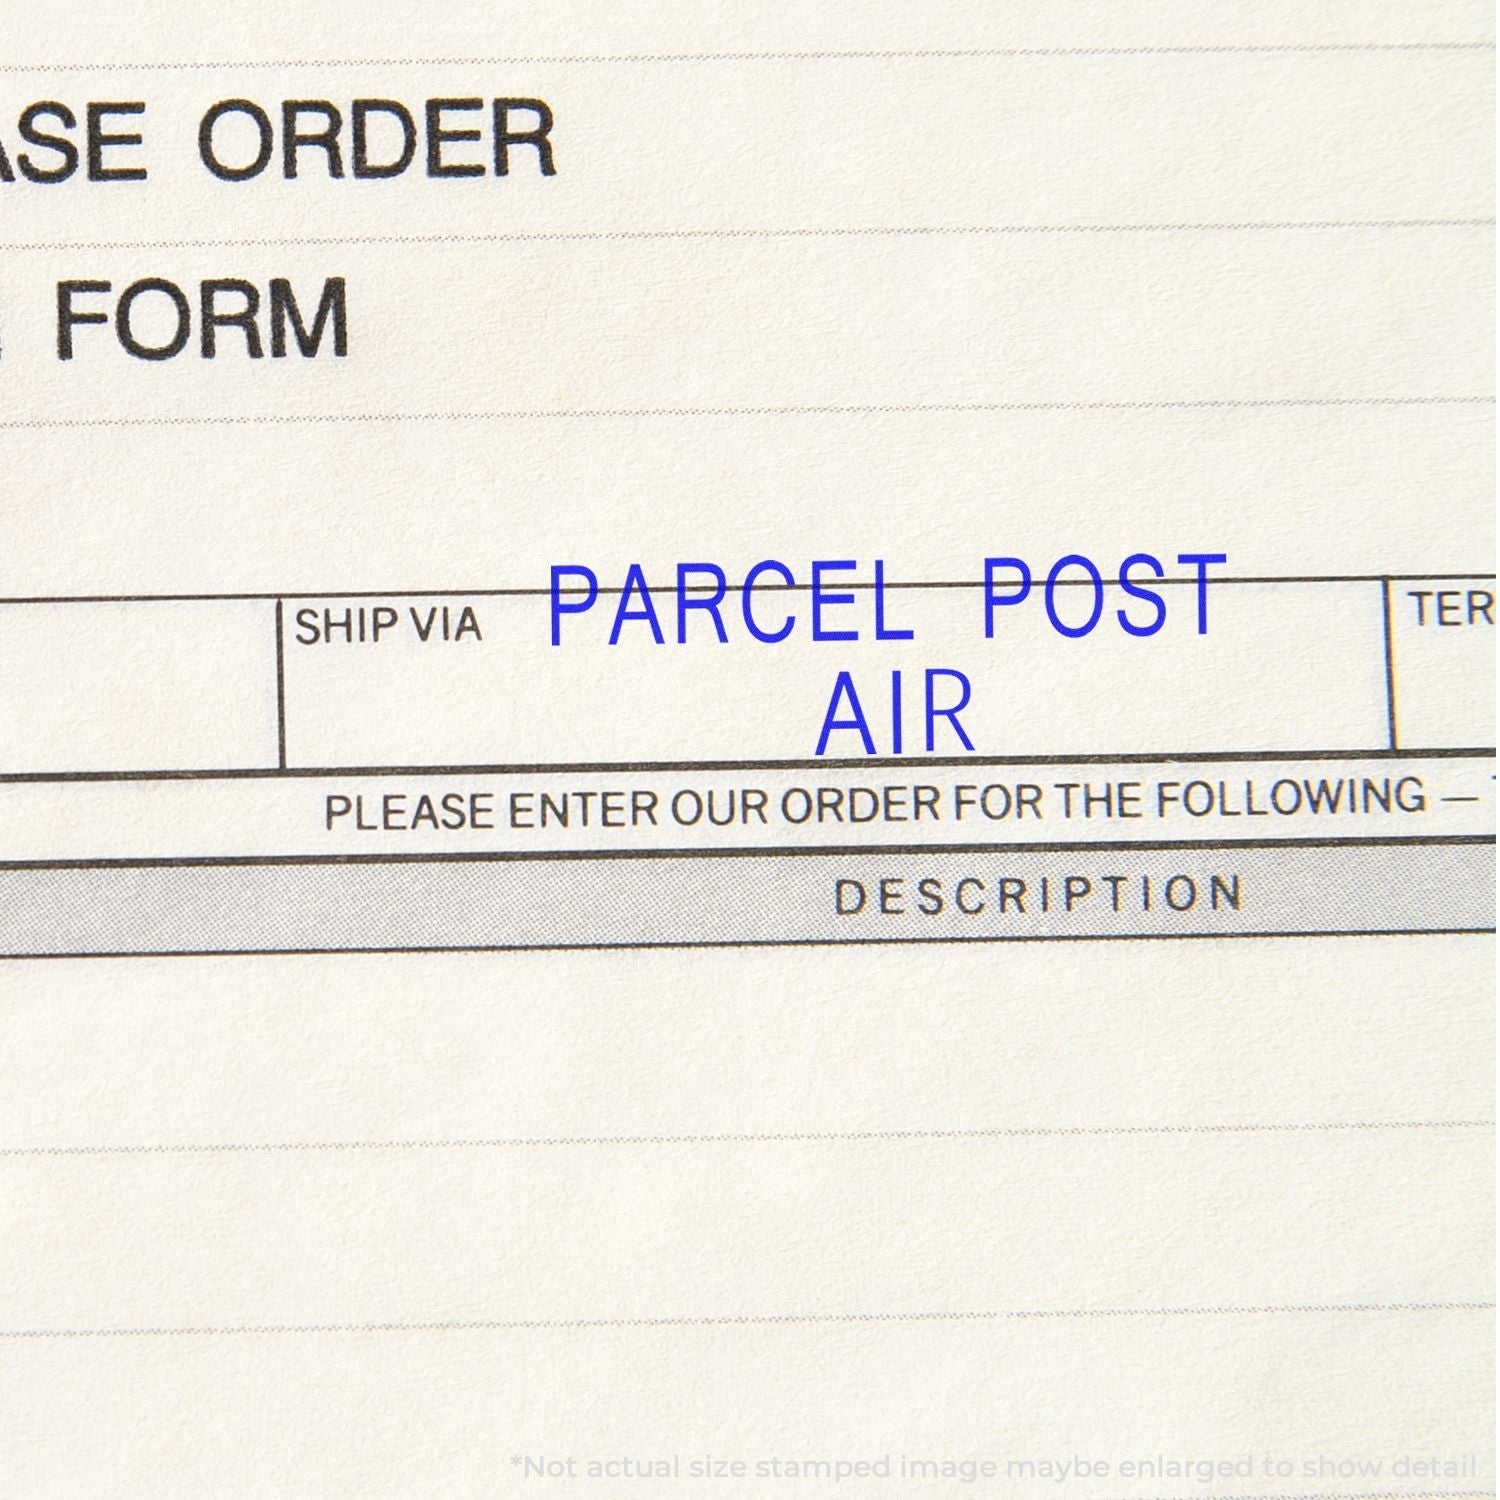 A self-inking stamp with a stamped image showing how the text "PARCEL POST AIR" is displayed after stamping.